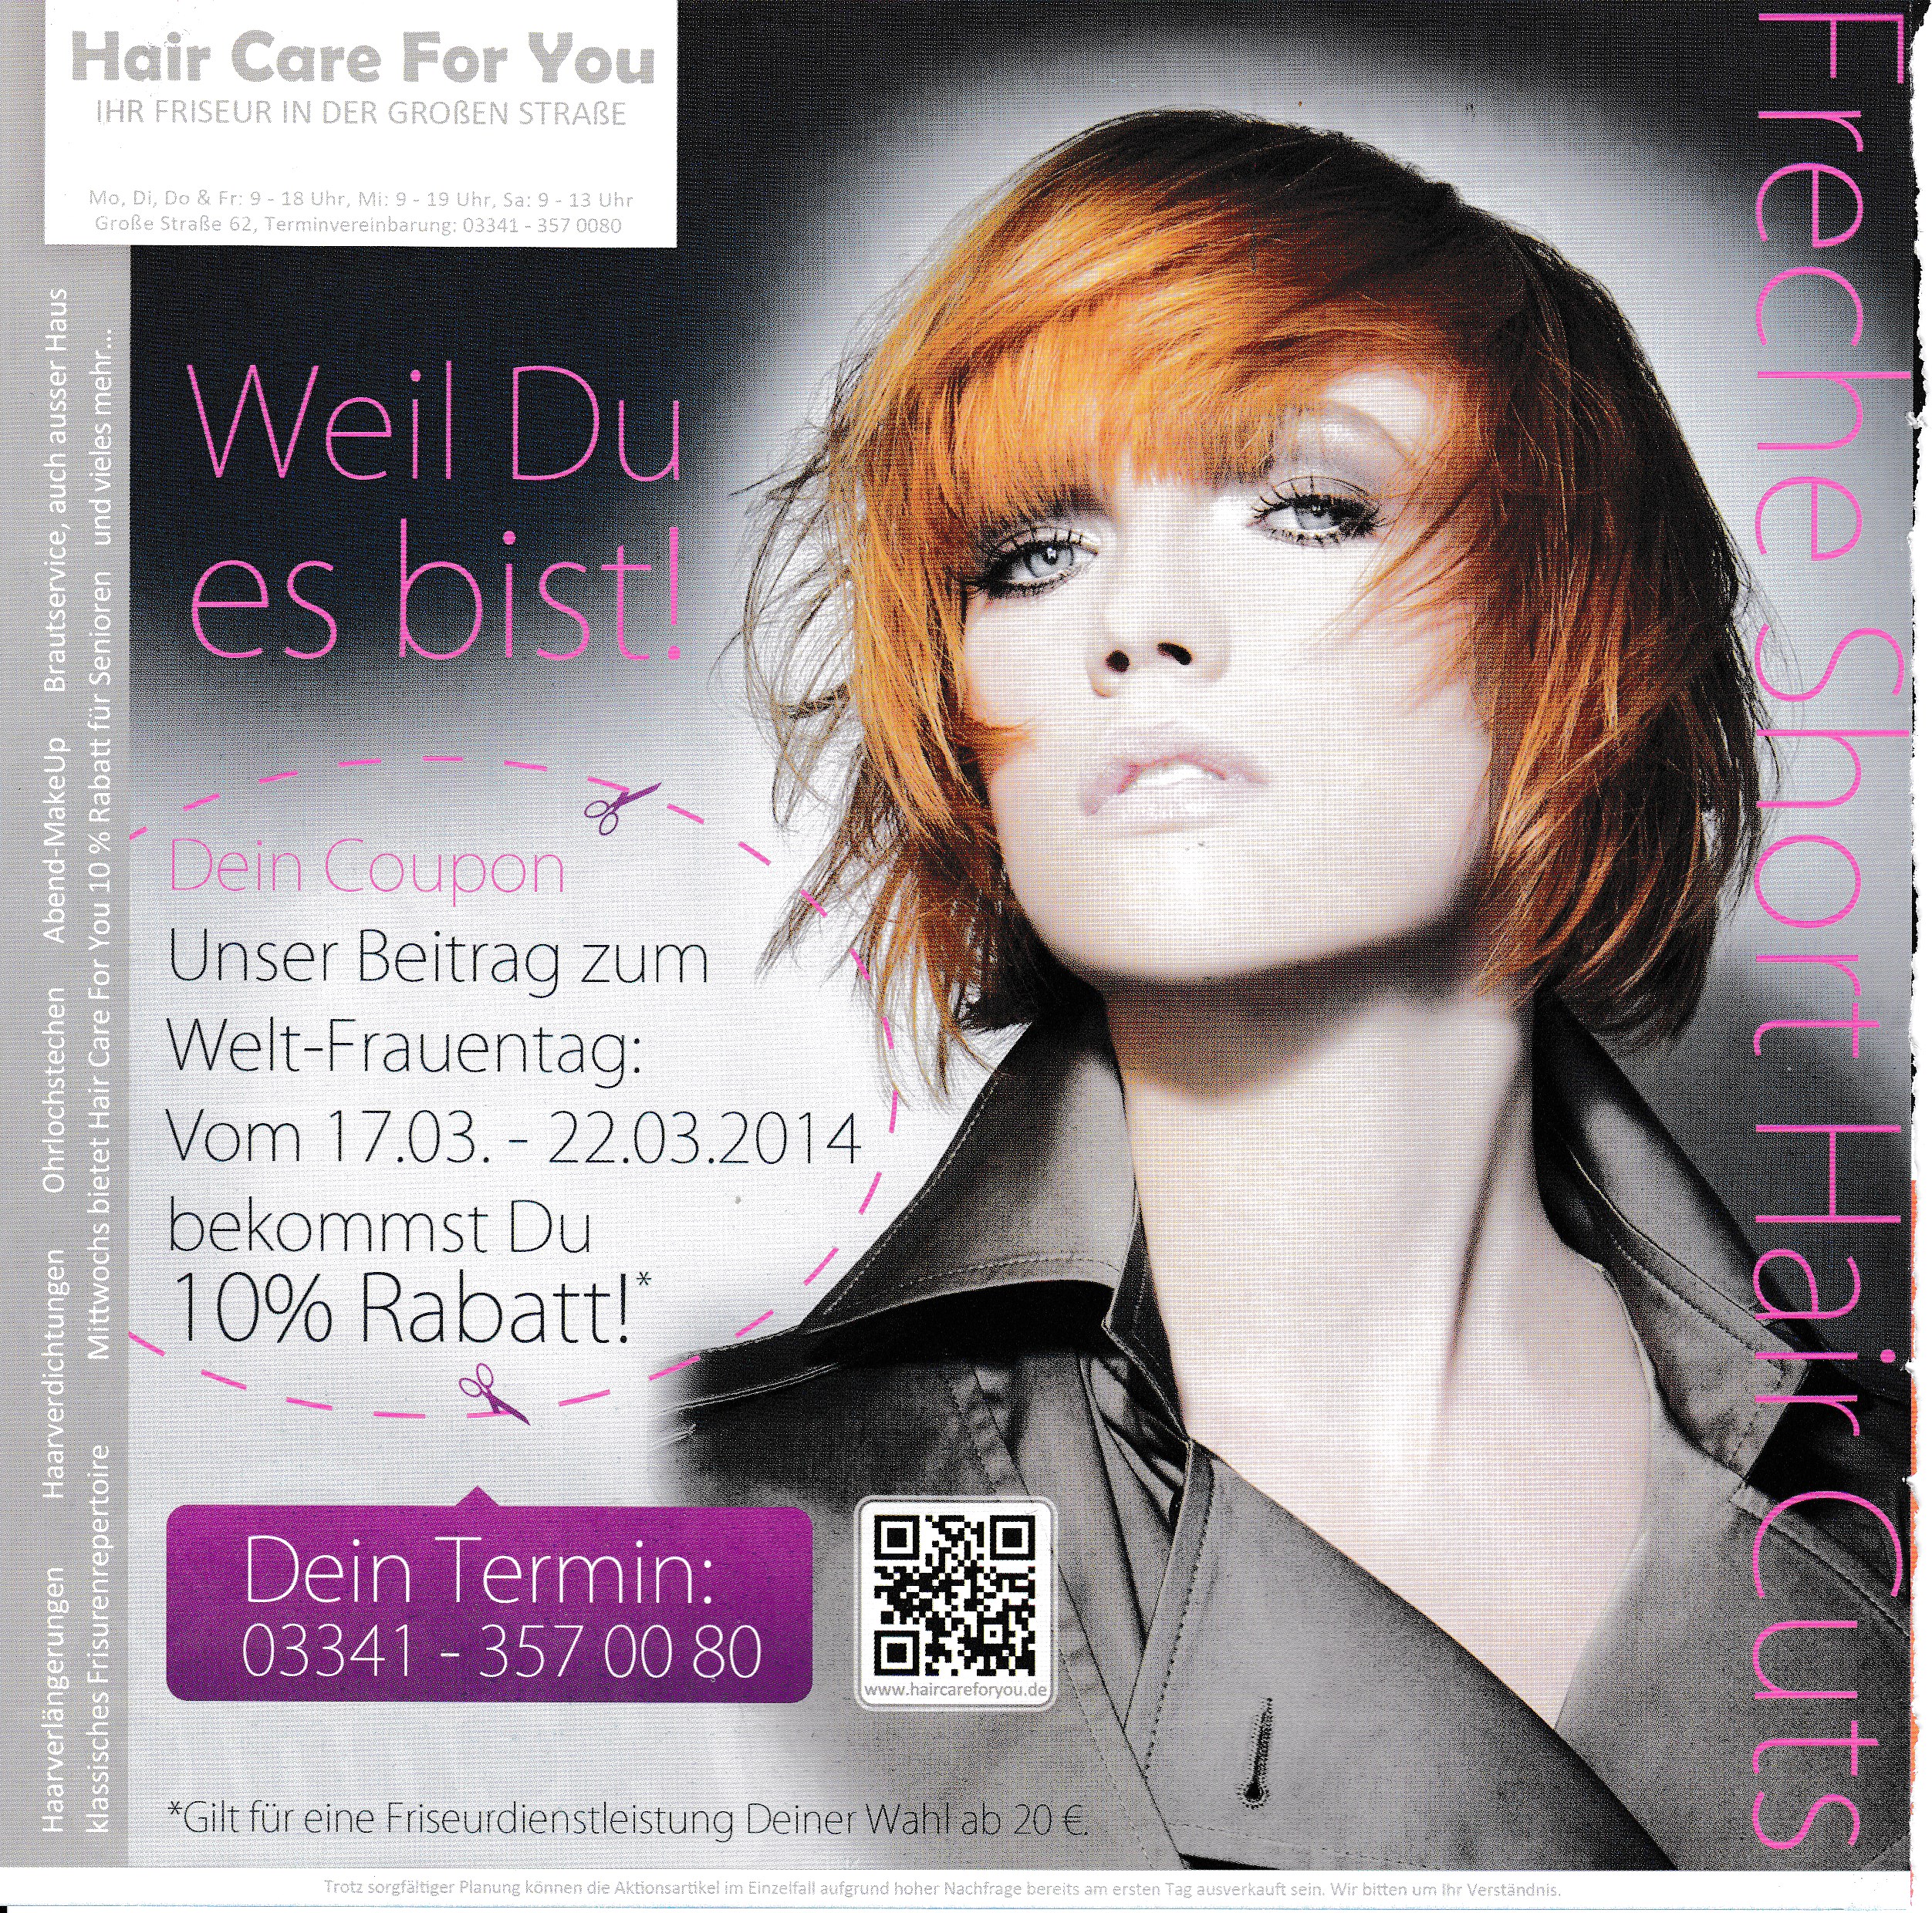 Bild 1 Hair Care For You GmbH in Strausberg